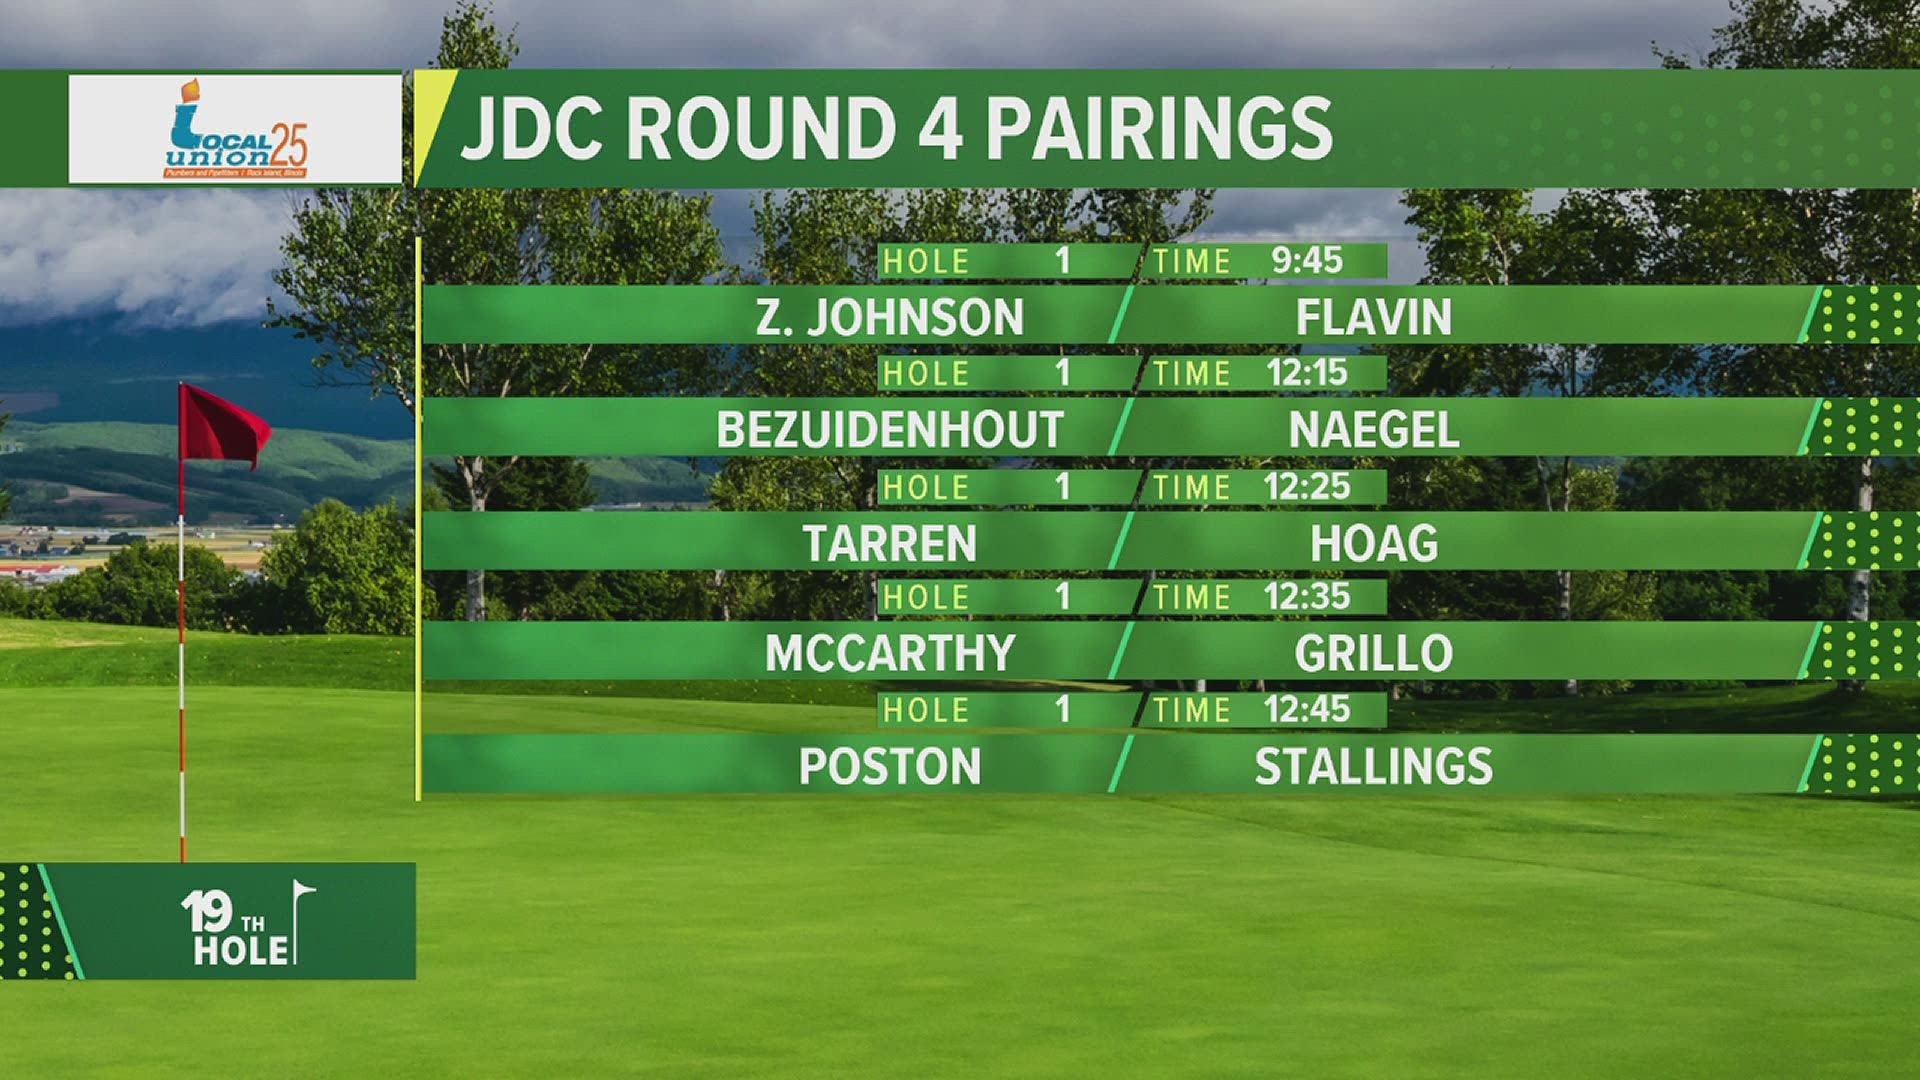 The News8 Sports Team runs through the pairings for Day 4 of the John Classic Classic ahead of the final round.